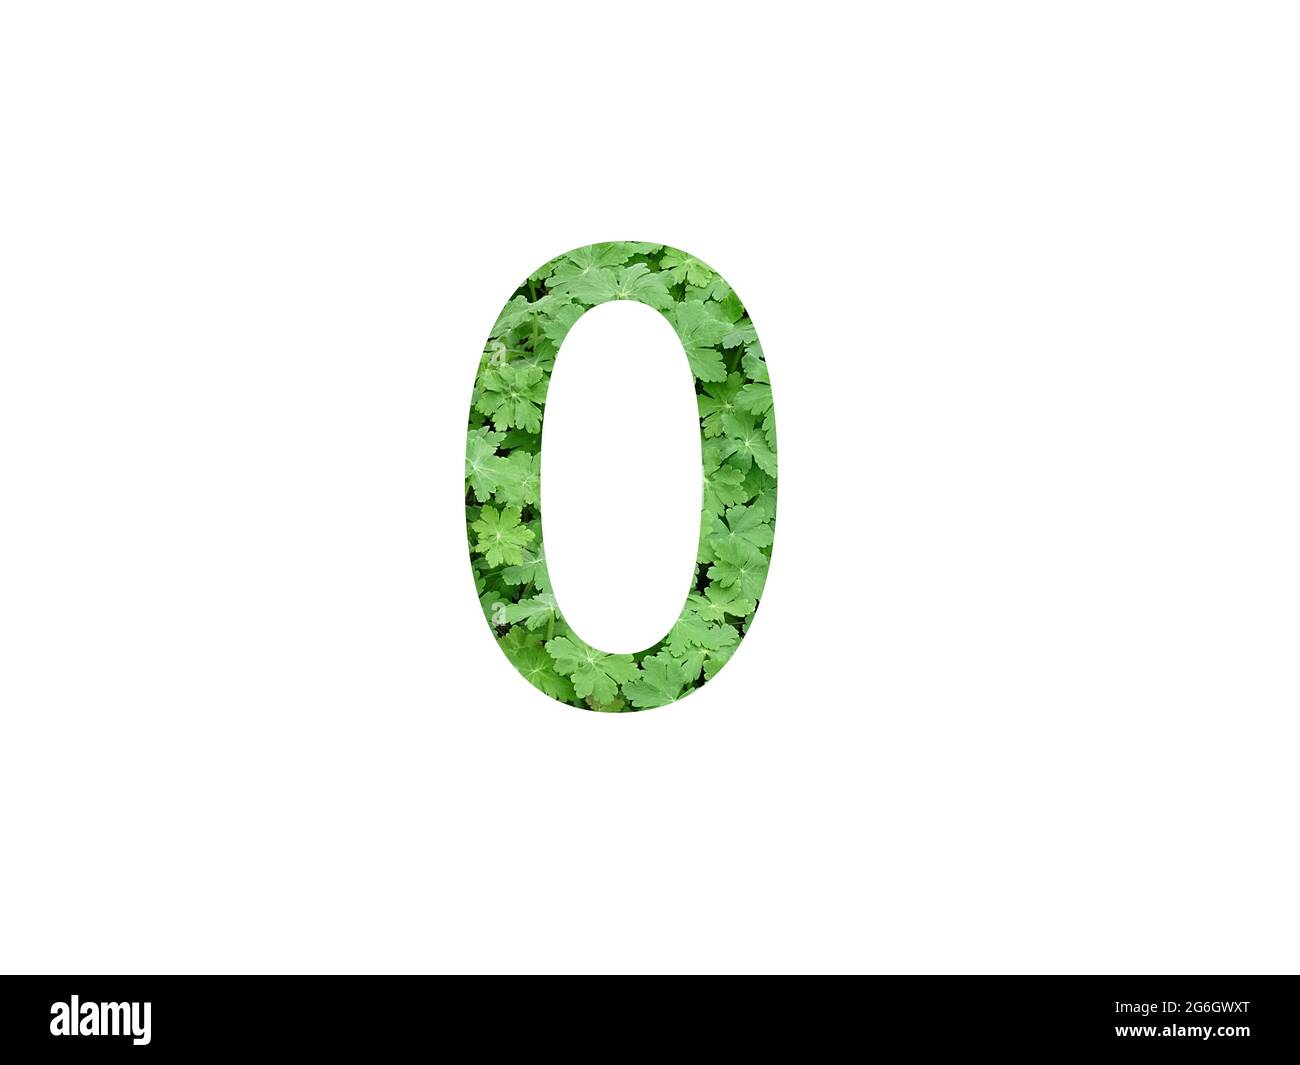 Number 0 of the alphabet made with green leaf of geranium plant, isolated on a white background Stock Photo